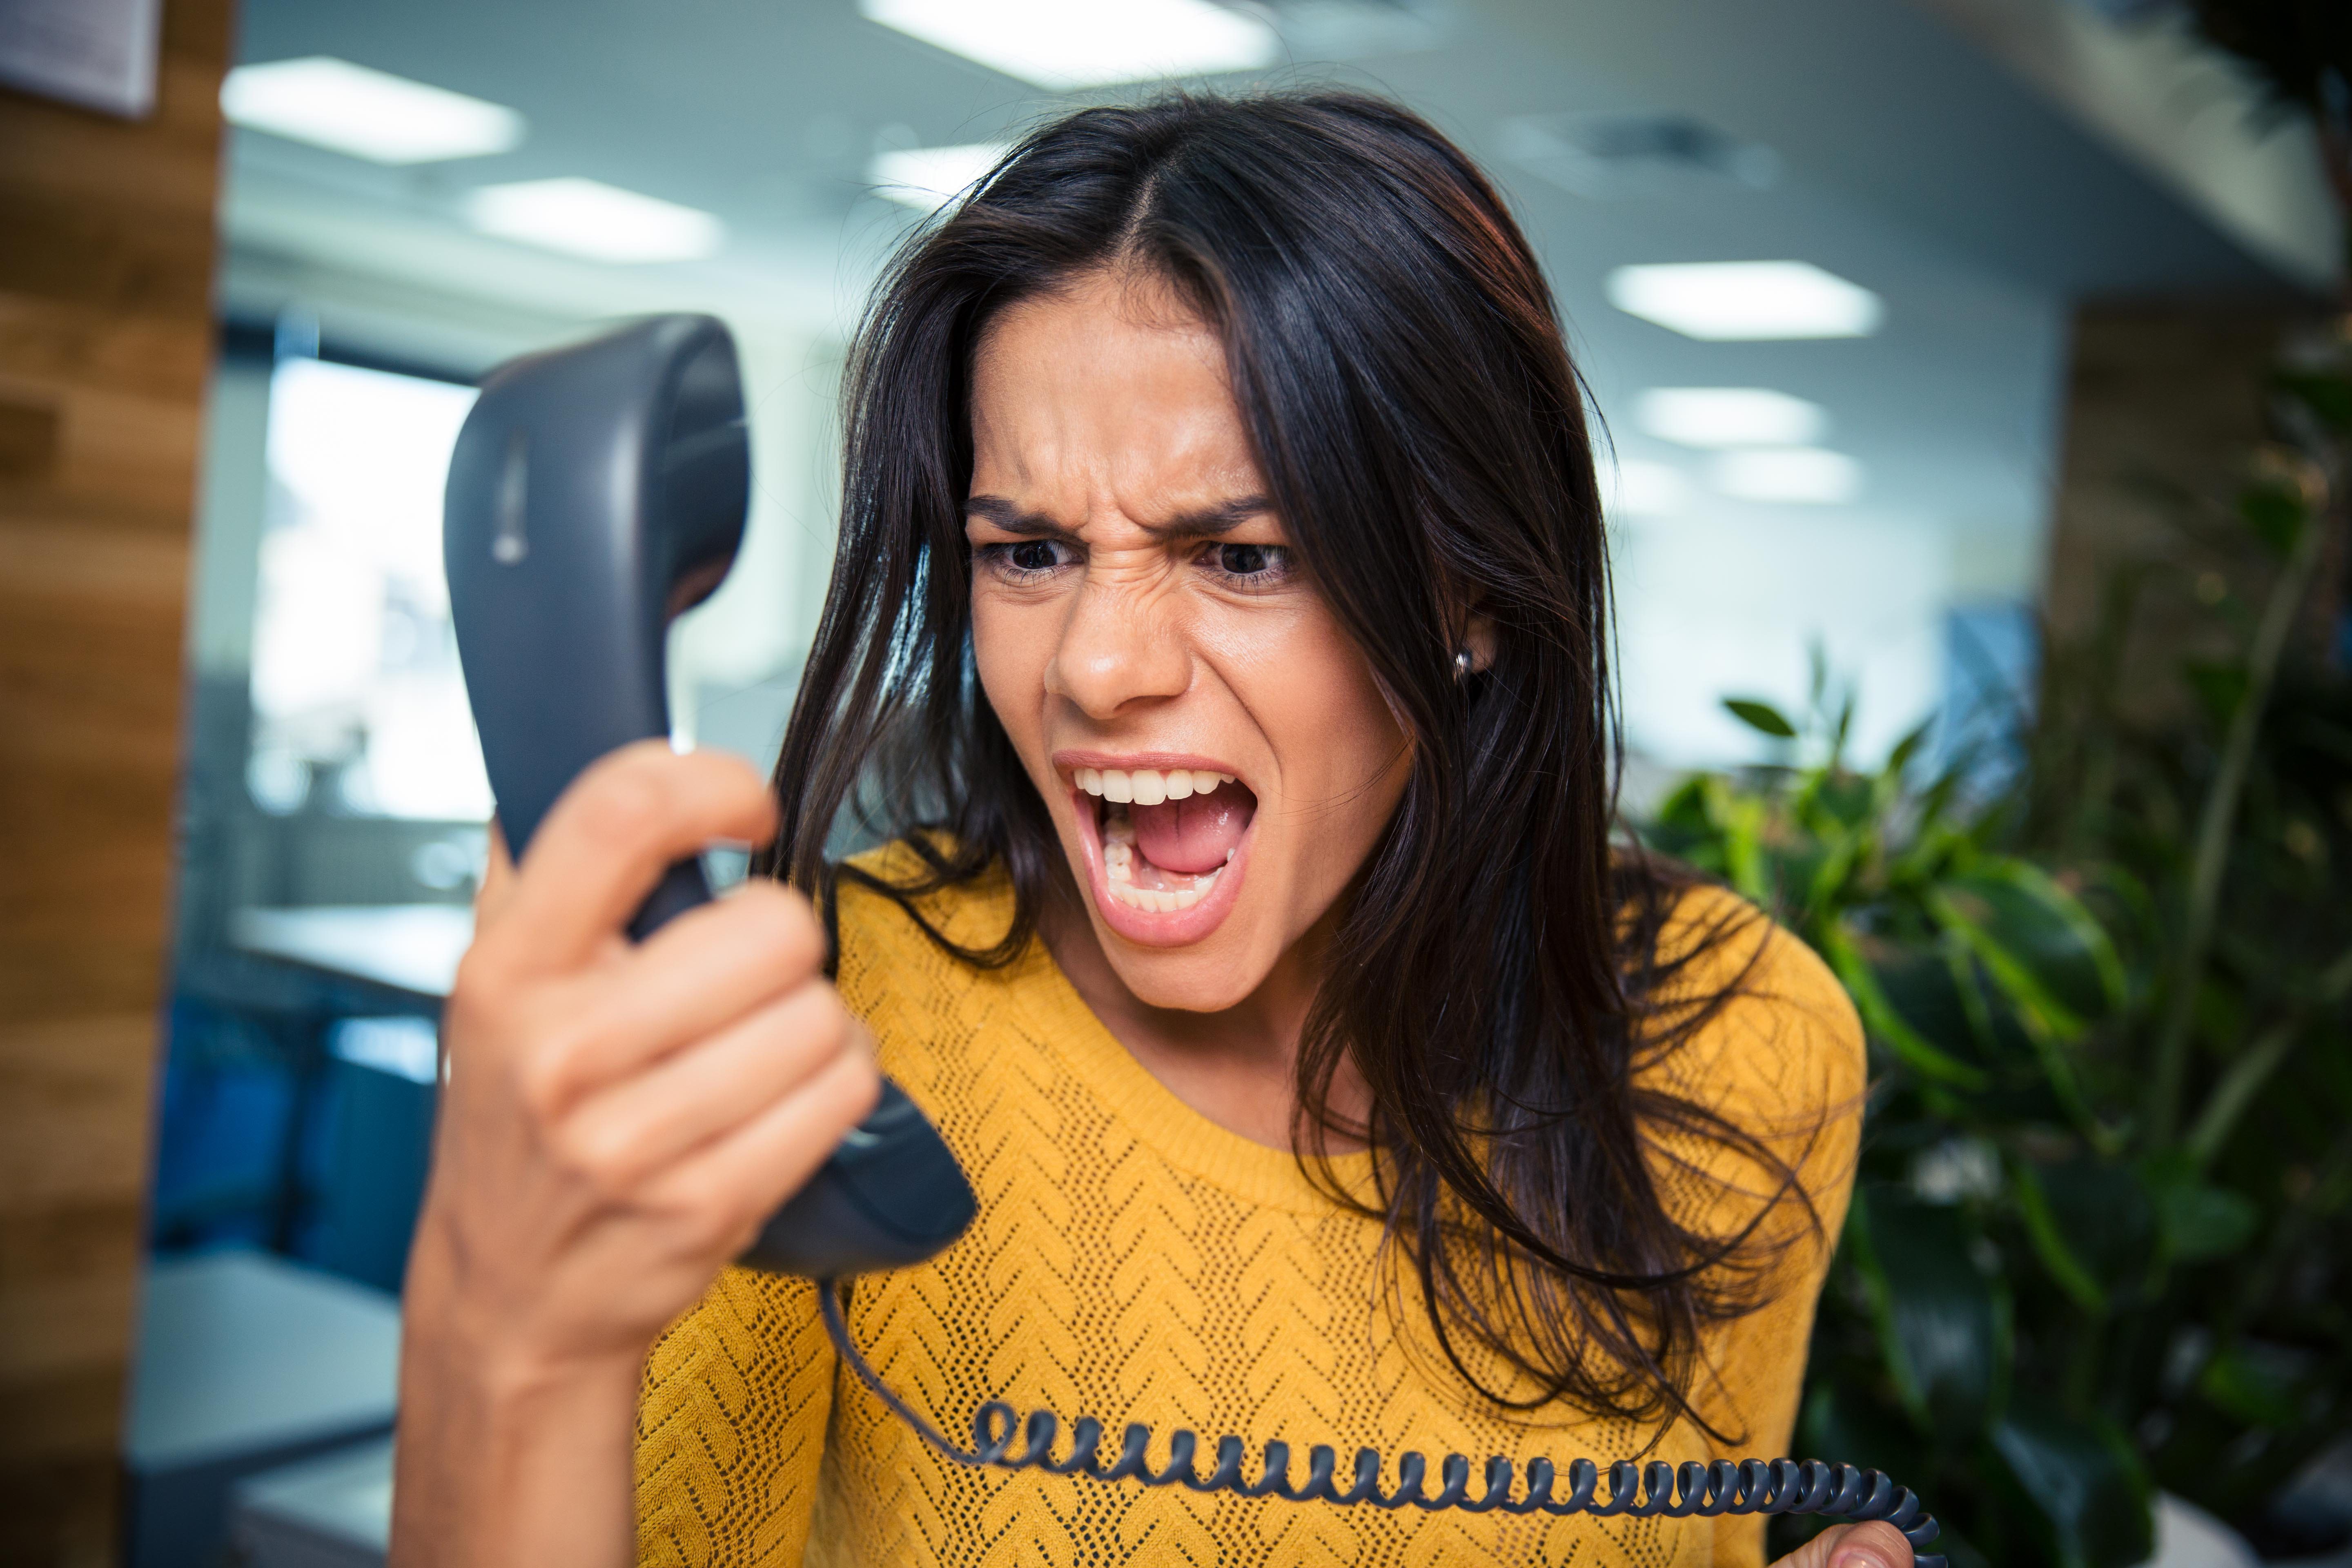 A woman yelling into the phone | Source: Shutterstock